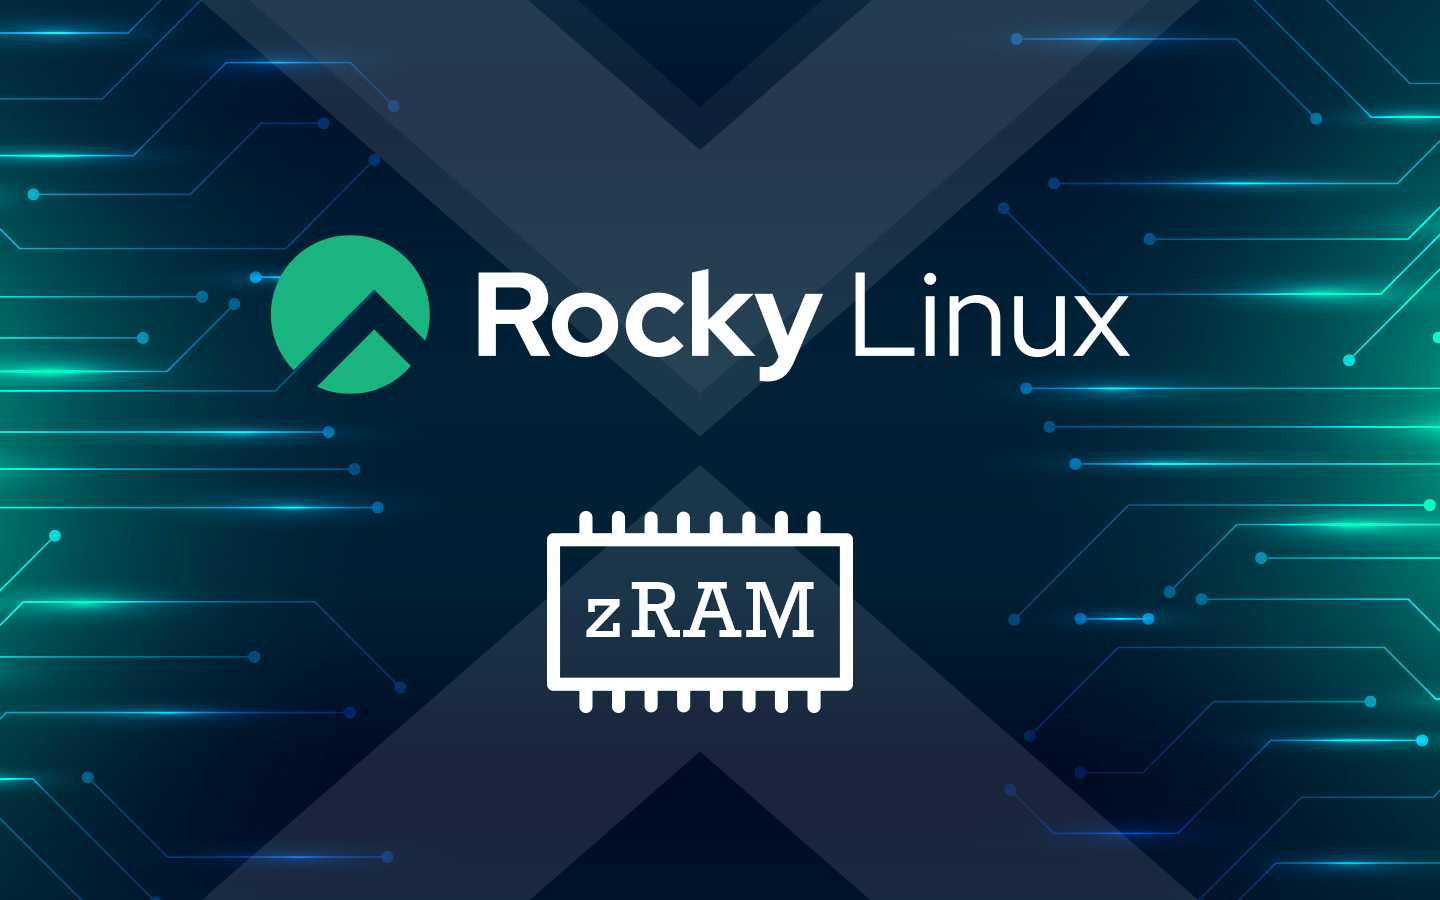 Enable zRAM on Rocky Linux to eke out as much speed as possible